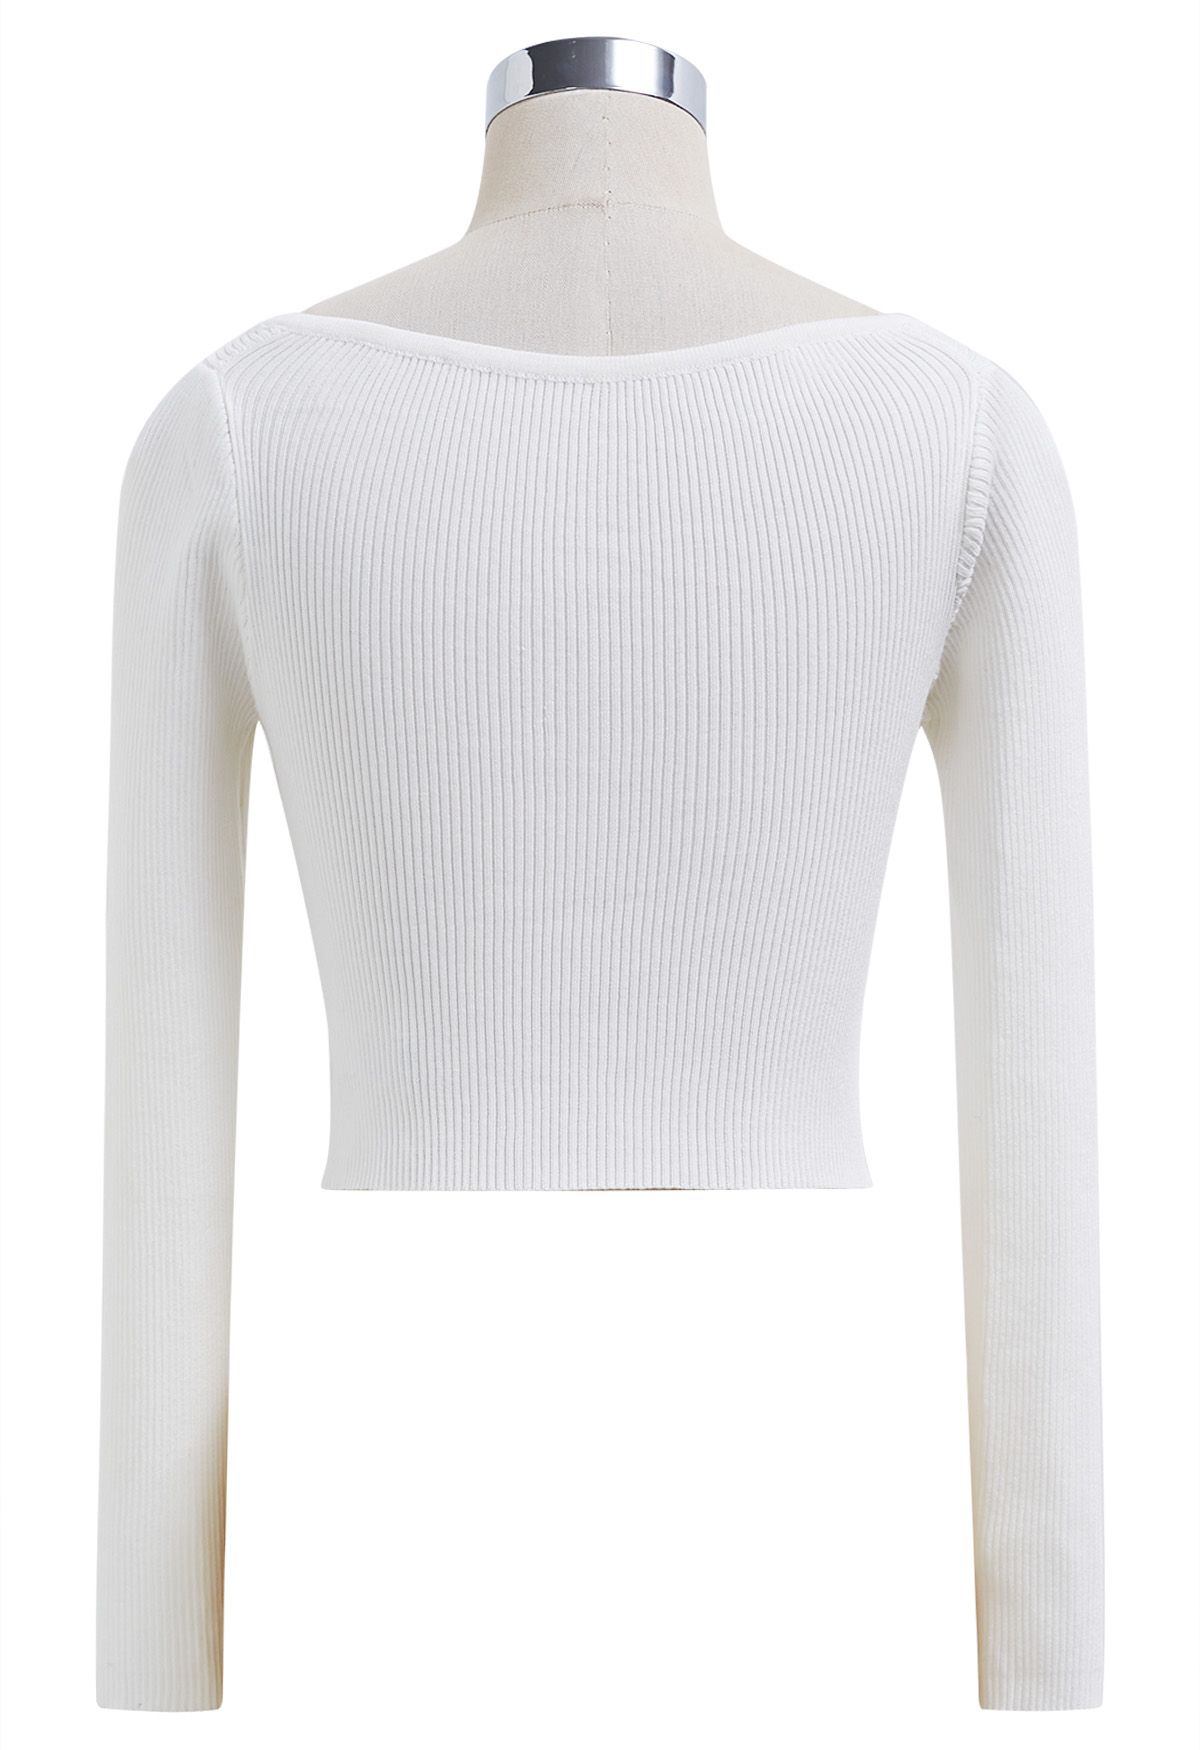 Notched Neckline Ribbed Knit Crop Top in White